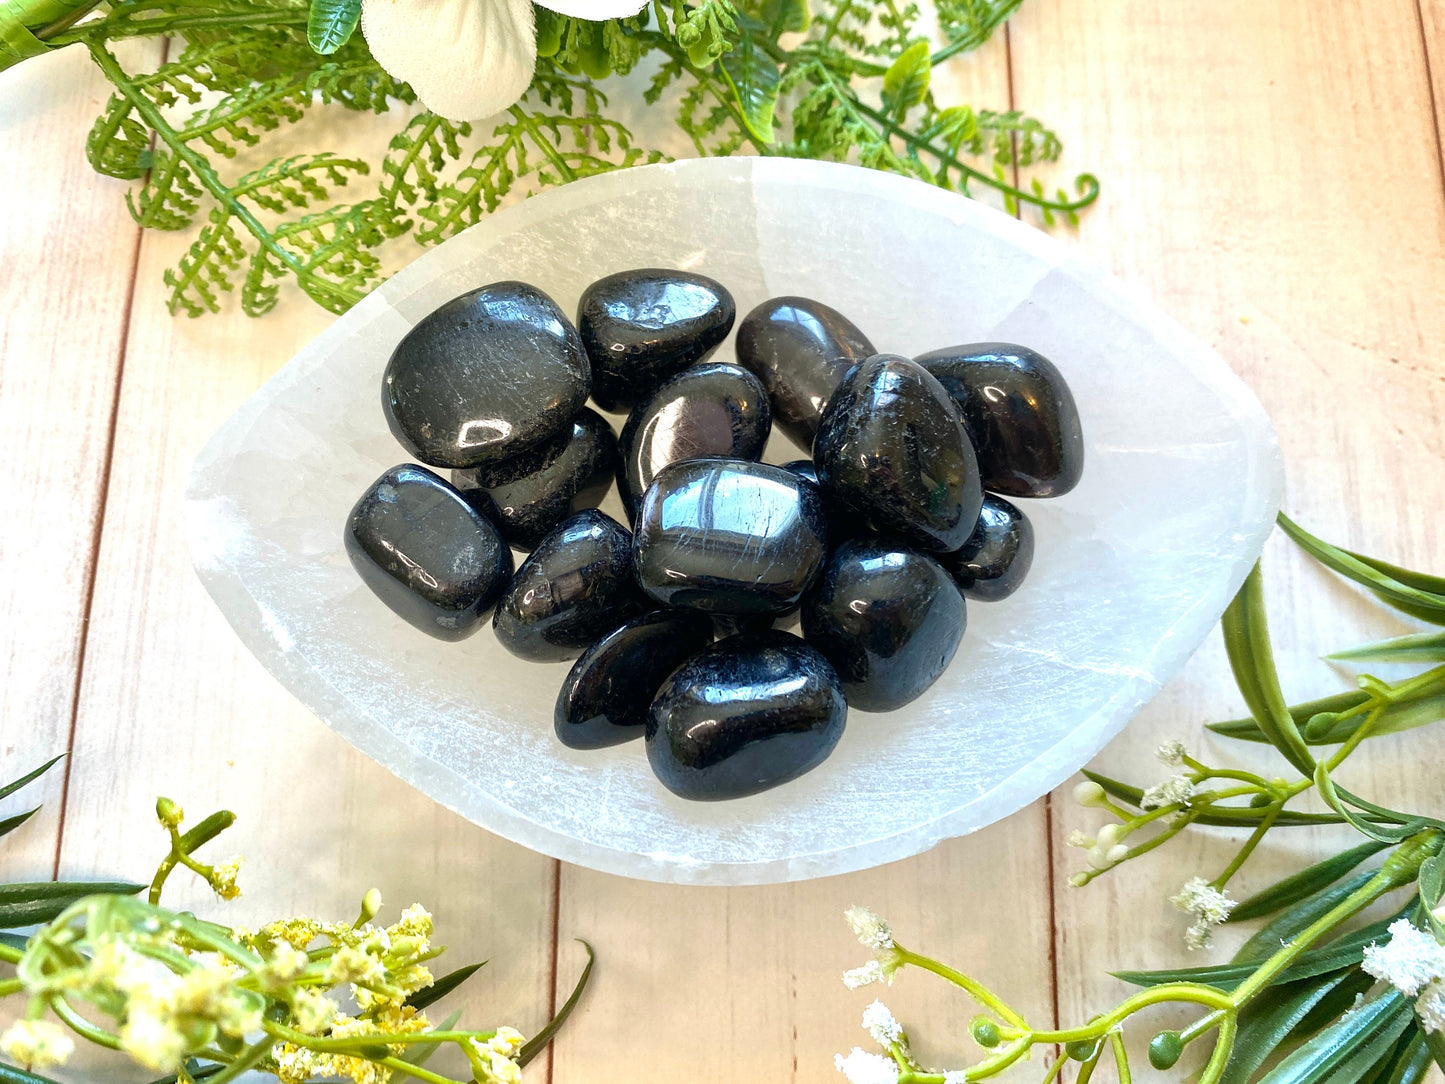 Tumbled Hypersthene - Stone For Mental Clarity